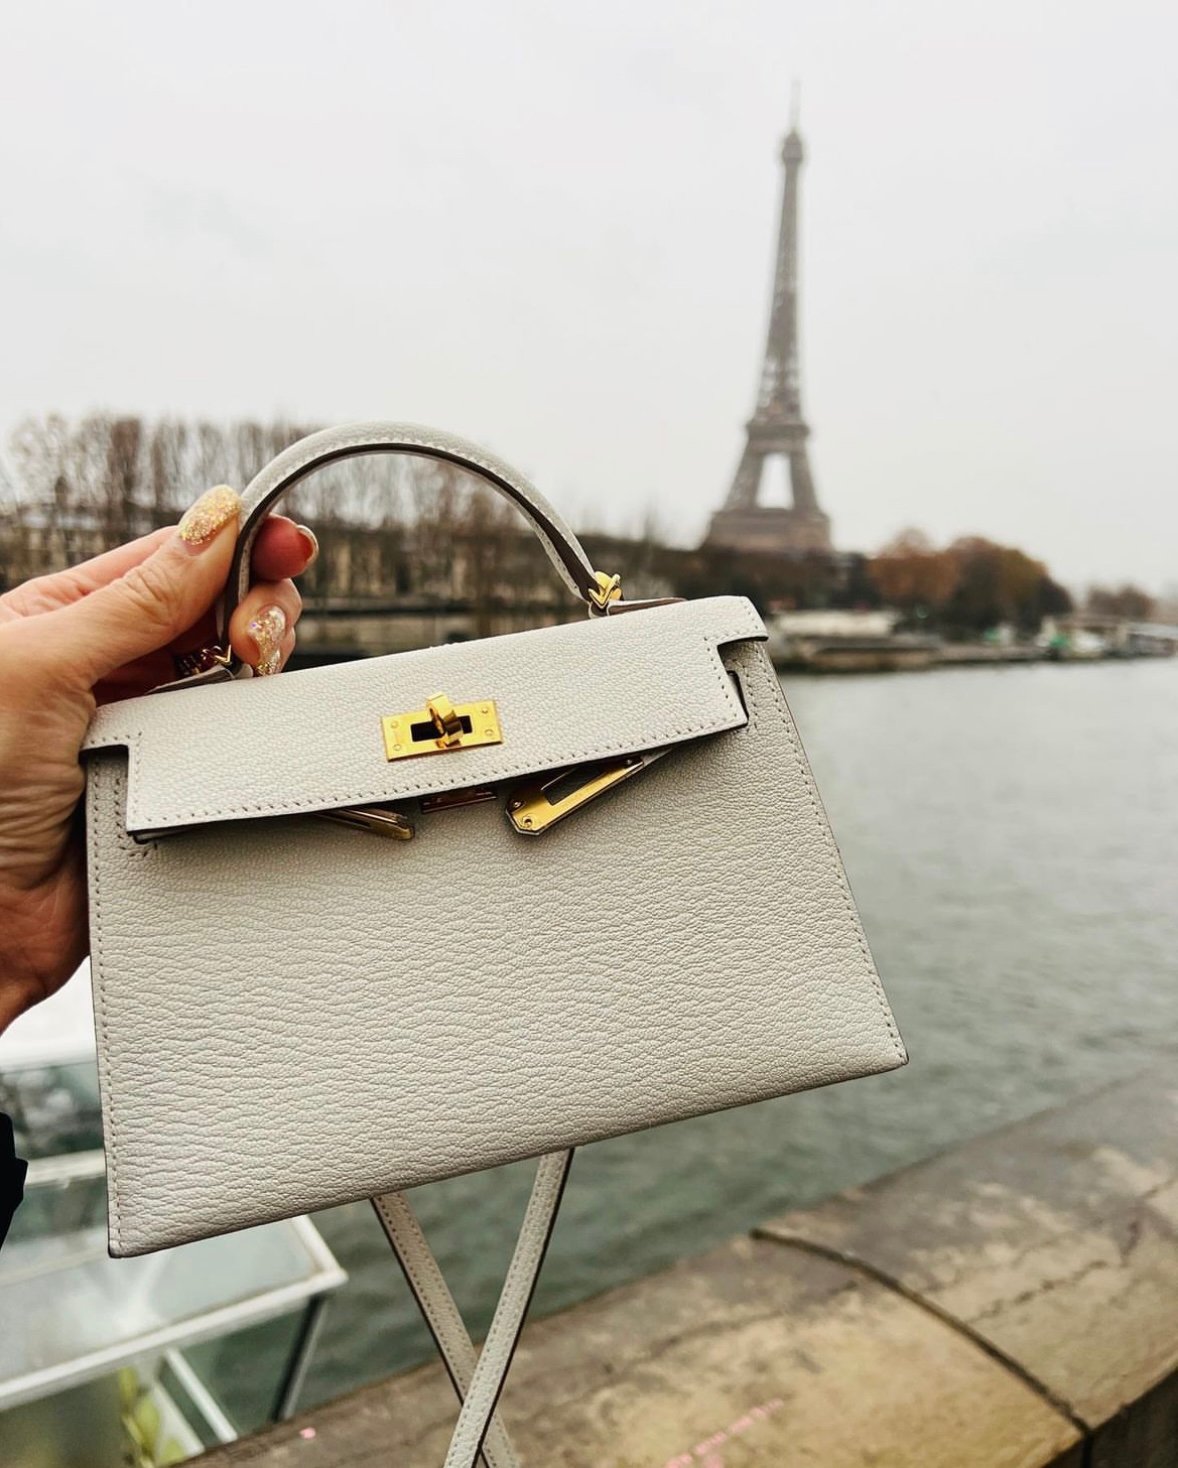 HERMES PRICE INCREASE JANUARY 2022! NEW PRICES IN PARIS FOR MINI